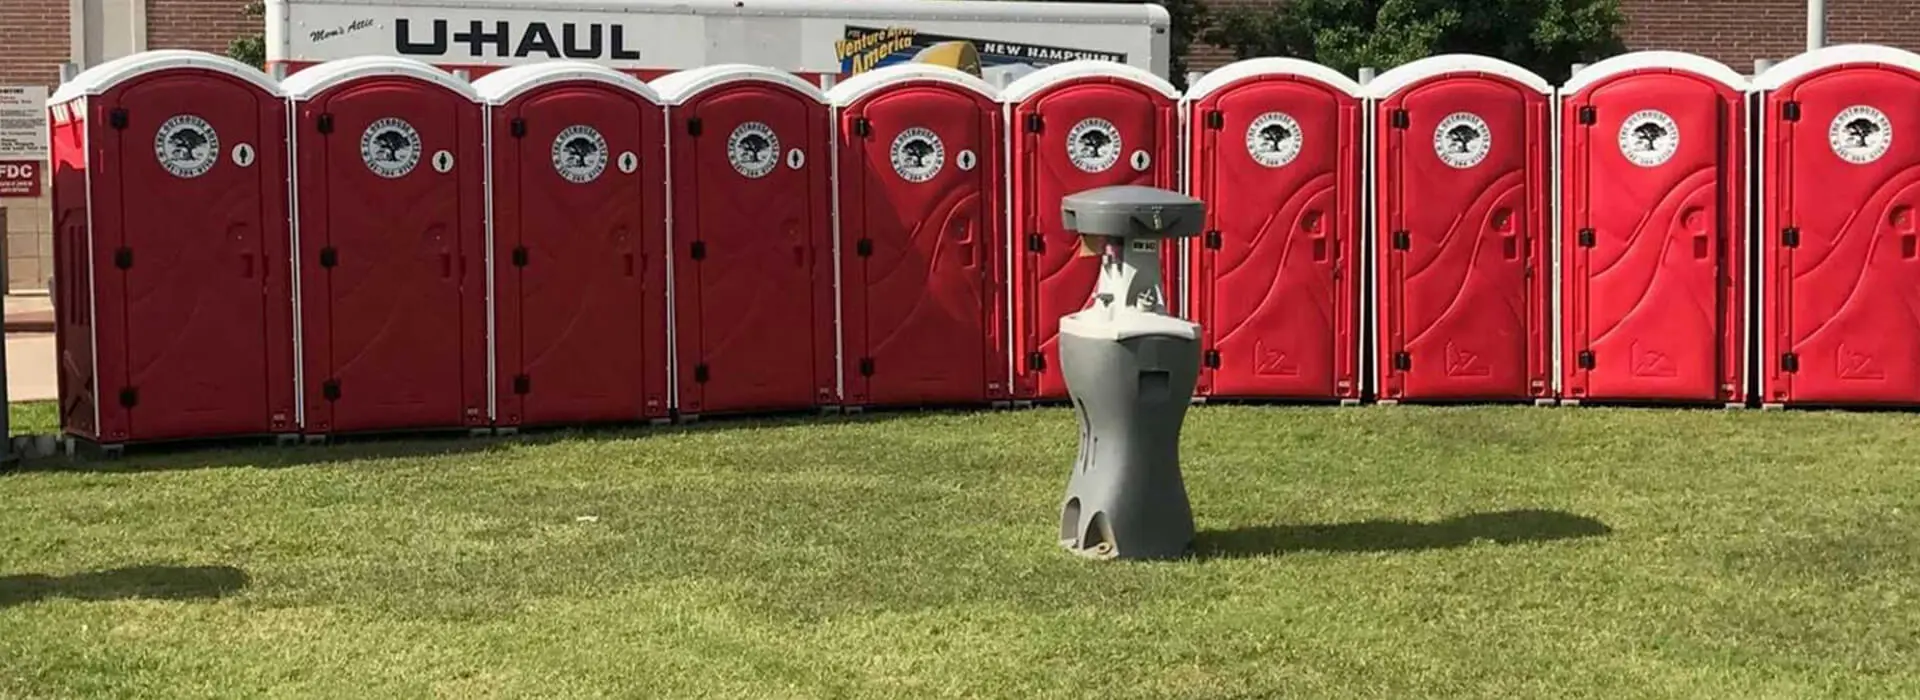 A red and white portable toilet sitting in the grass.